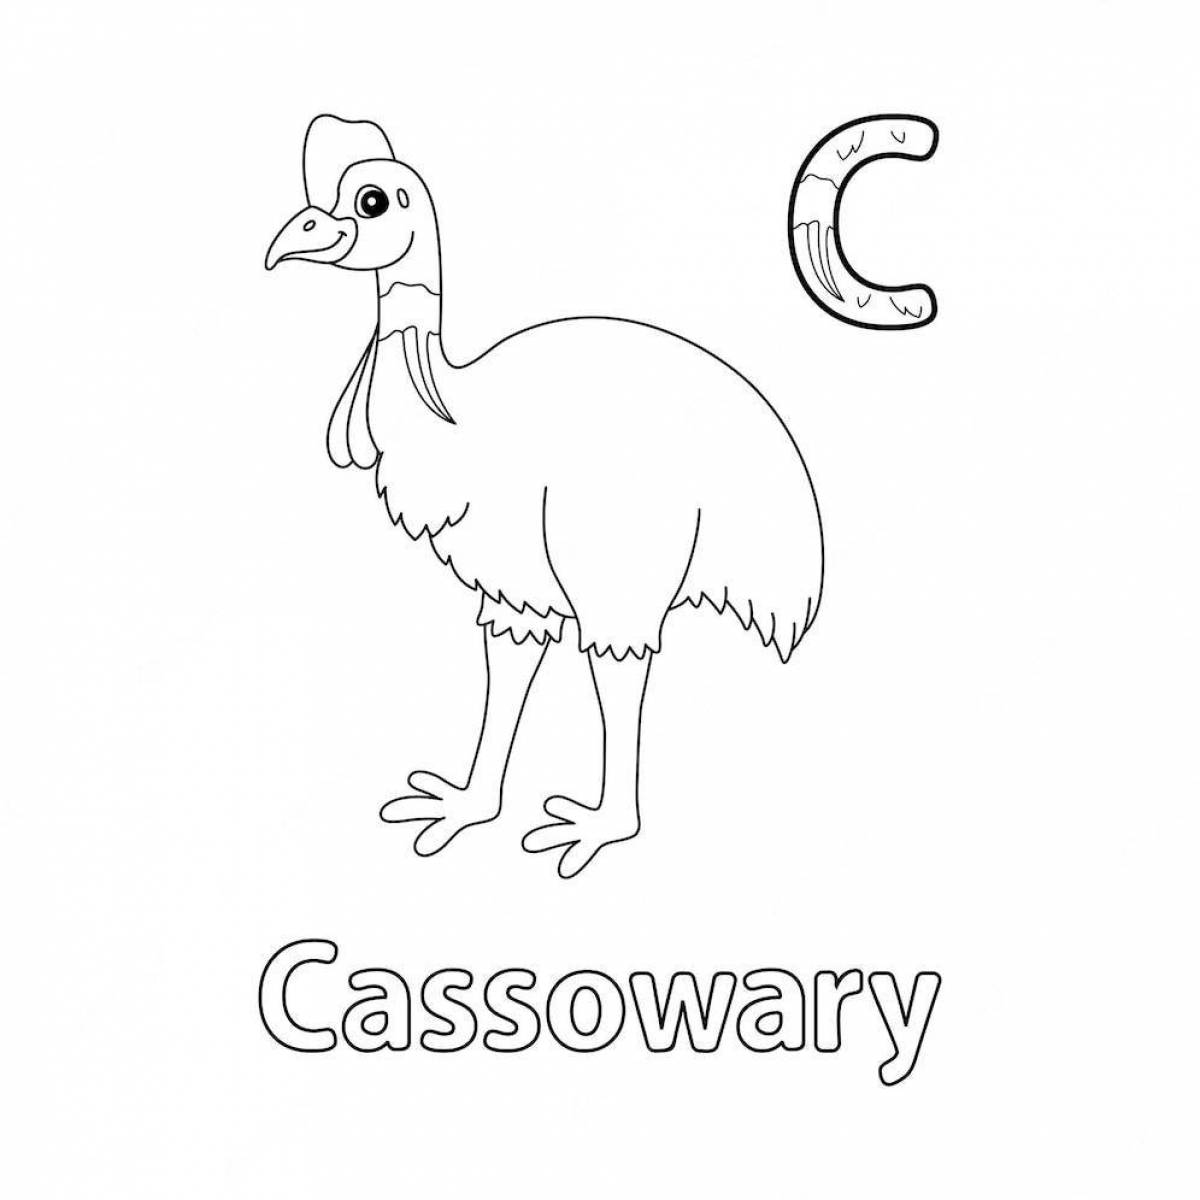 Cassowary fun coloring for kids